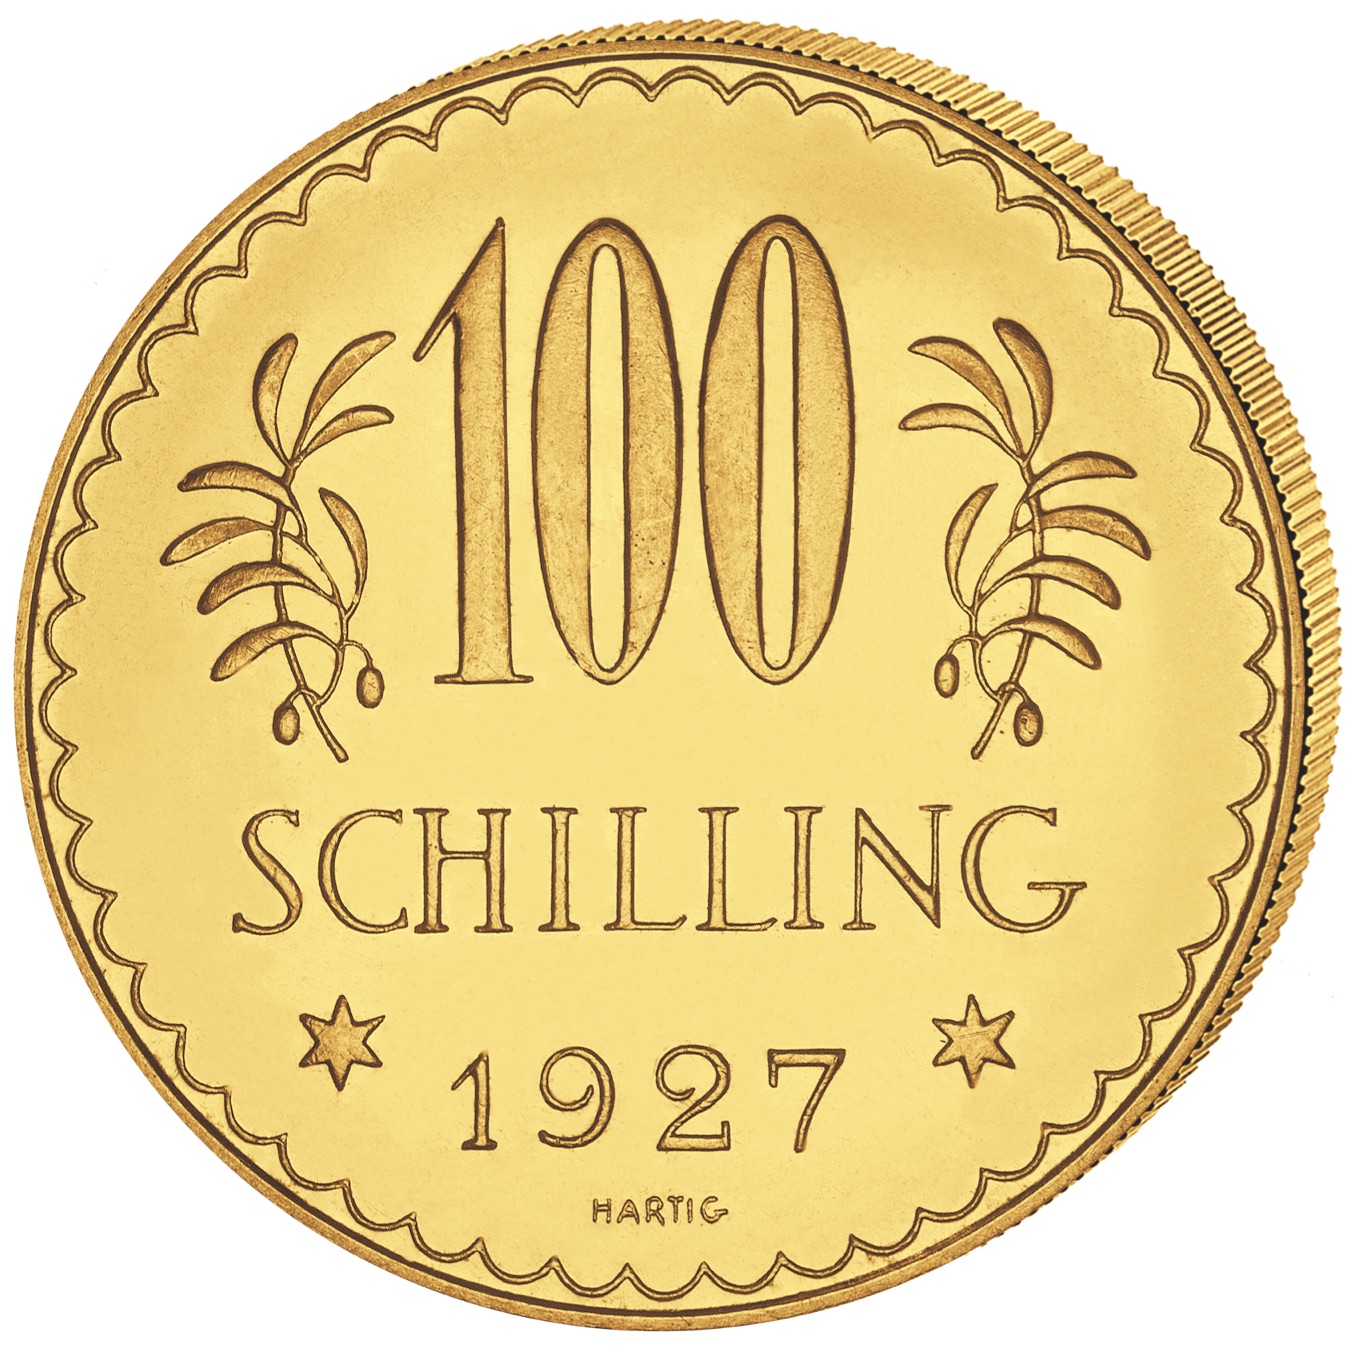 AT 100 Schilling 1933